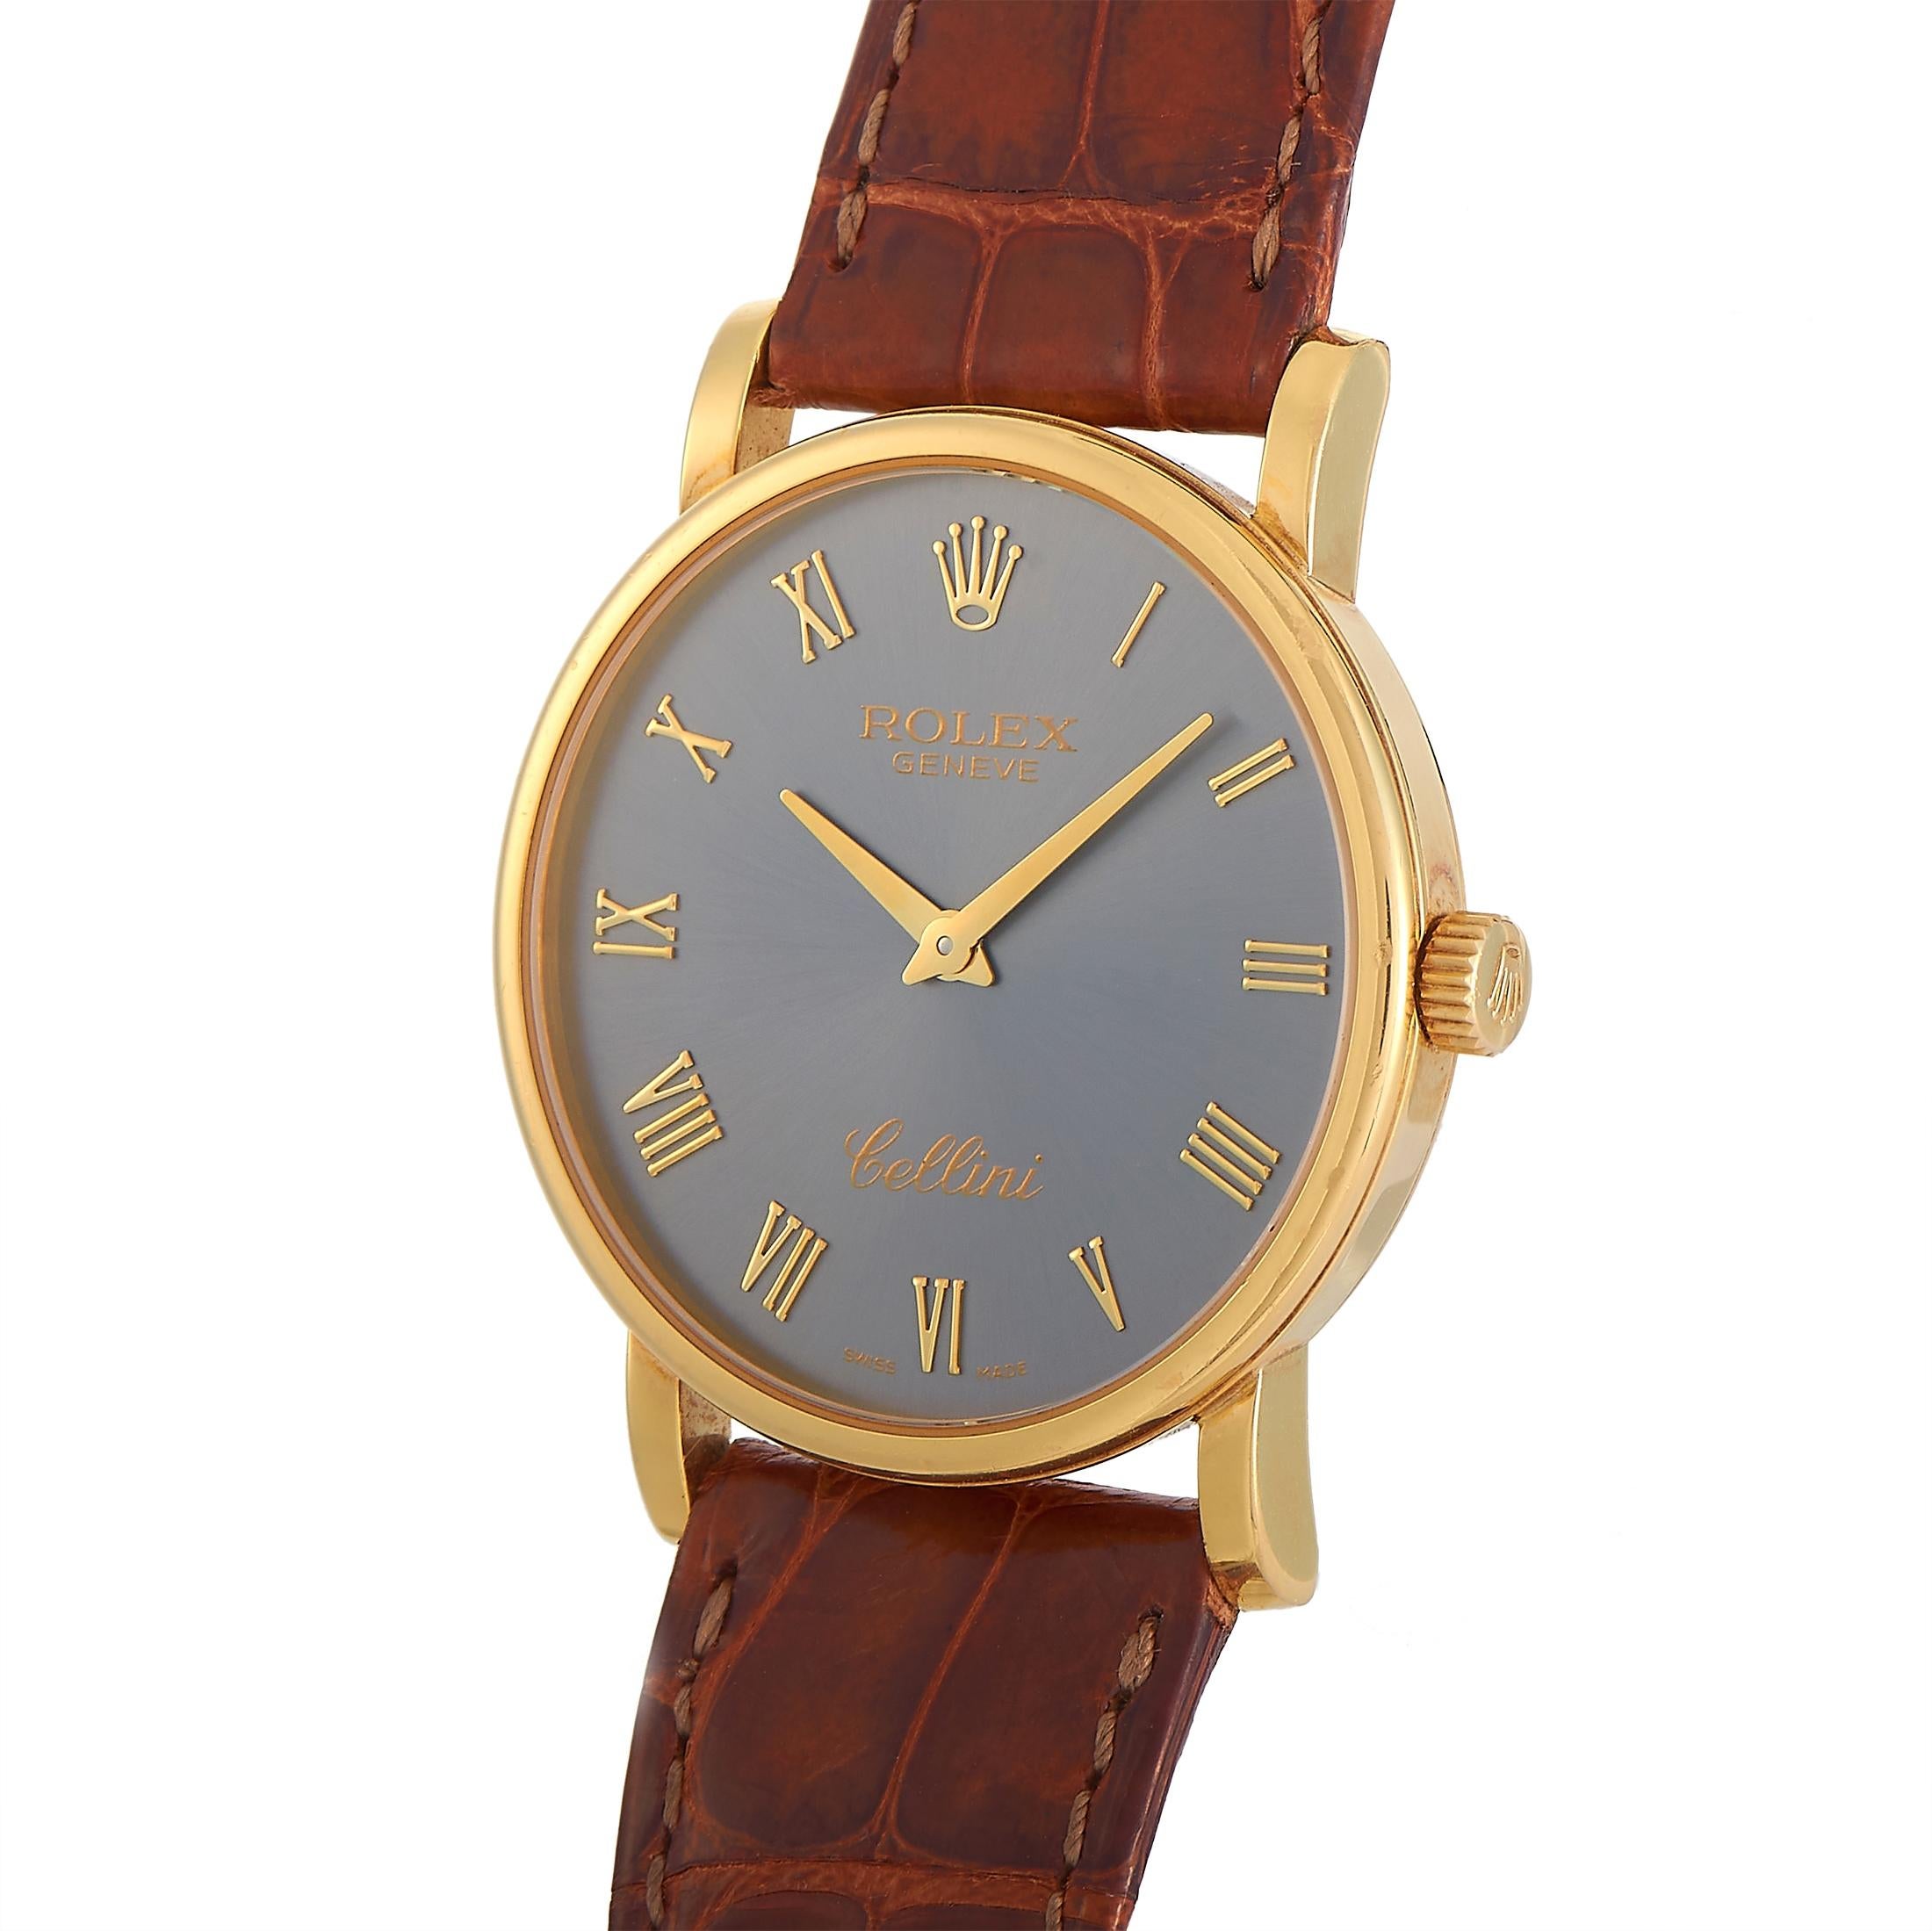 A handsome statement watch with a minimalist design, this Rolex Cellini 18K Yellow Gold Slate Watch 5115/8 is a discontinued model carrying the 